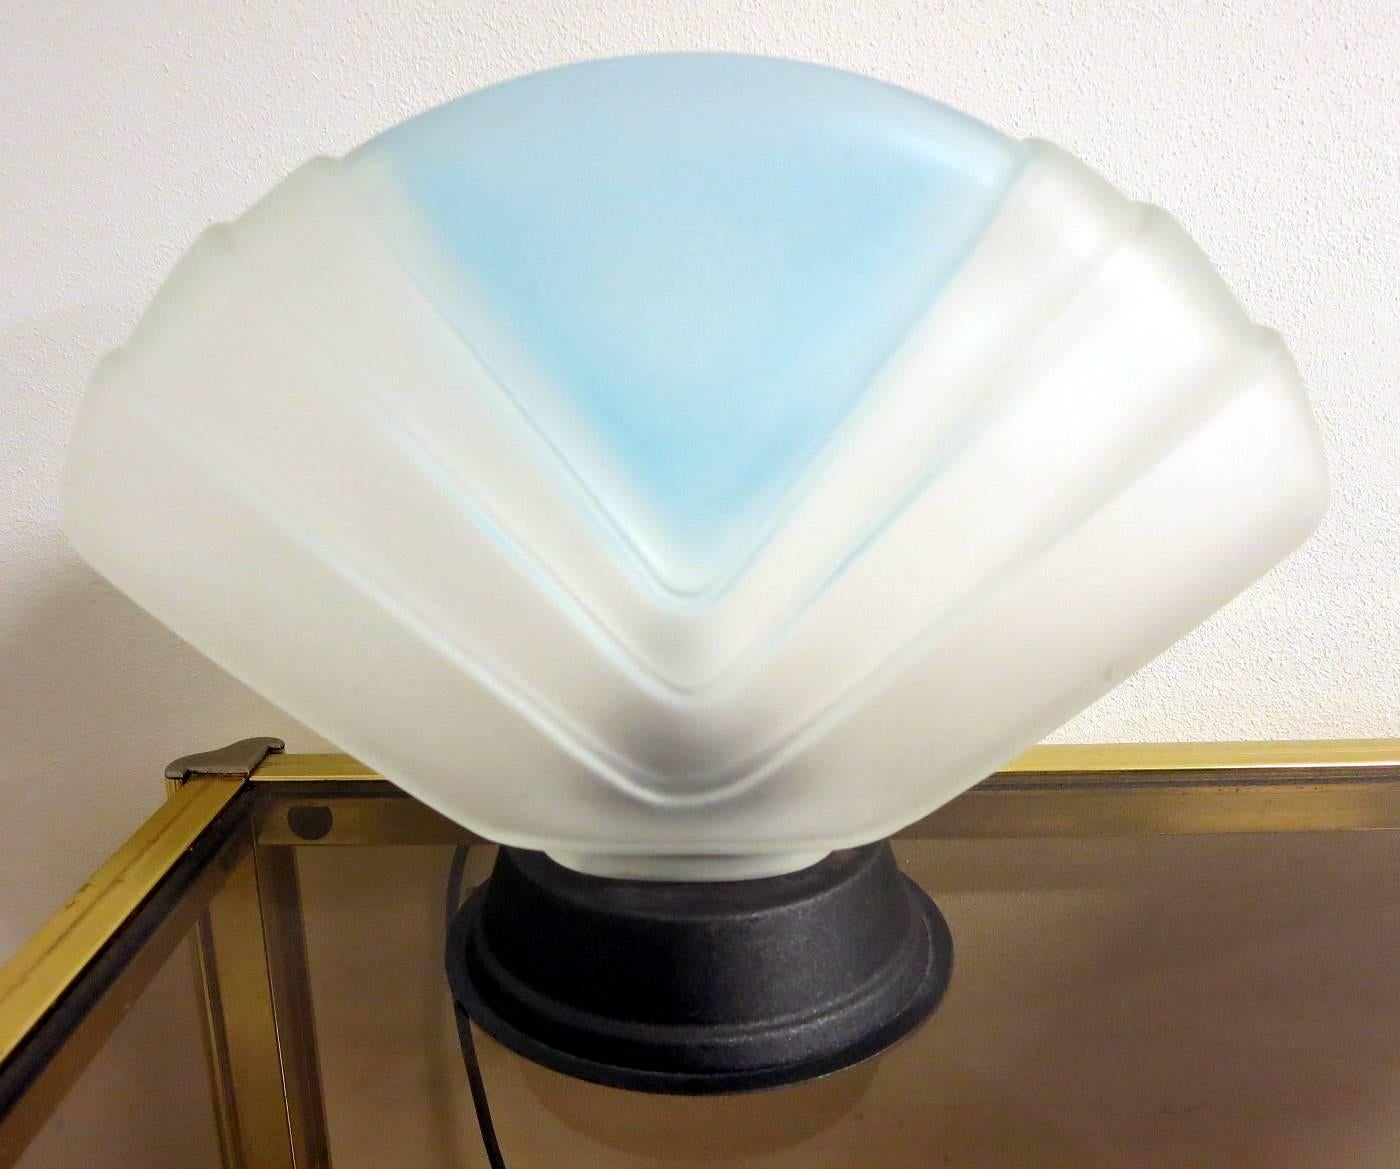 1940s Art Deco style pair of frosted glass table lamps with original Murano sticker. (One light each)

 